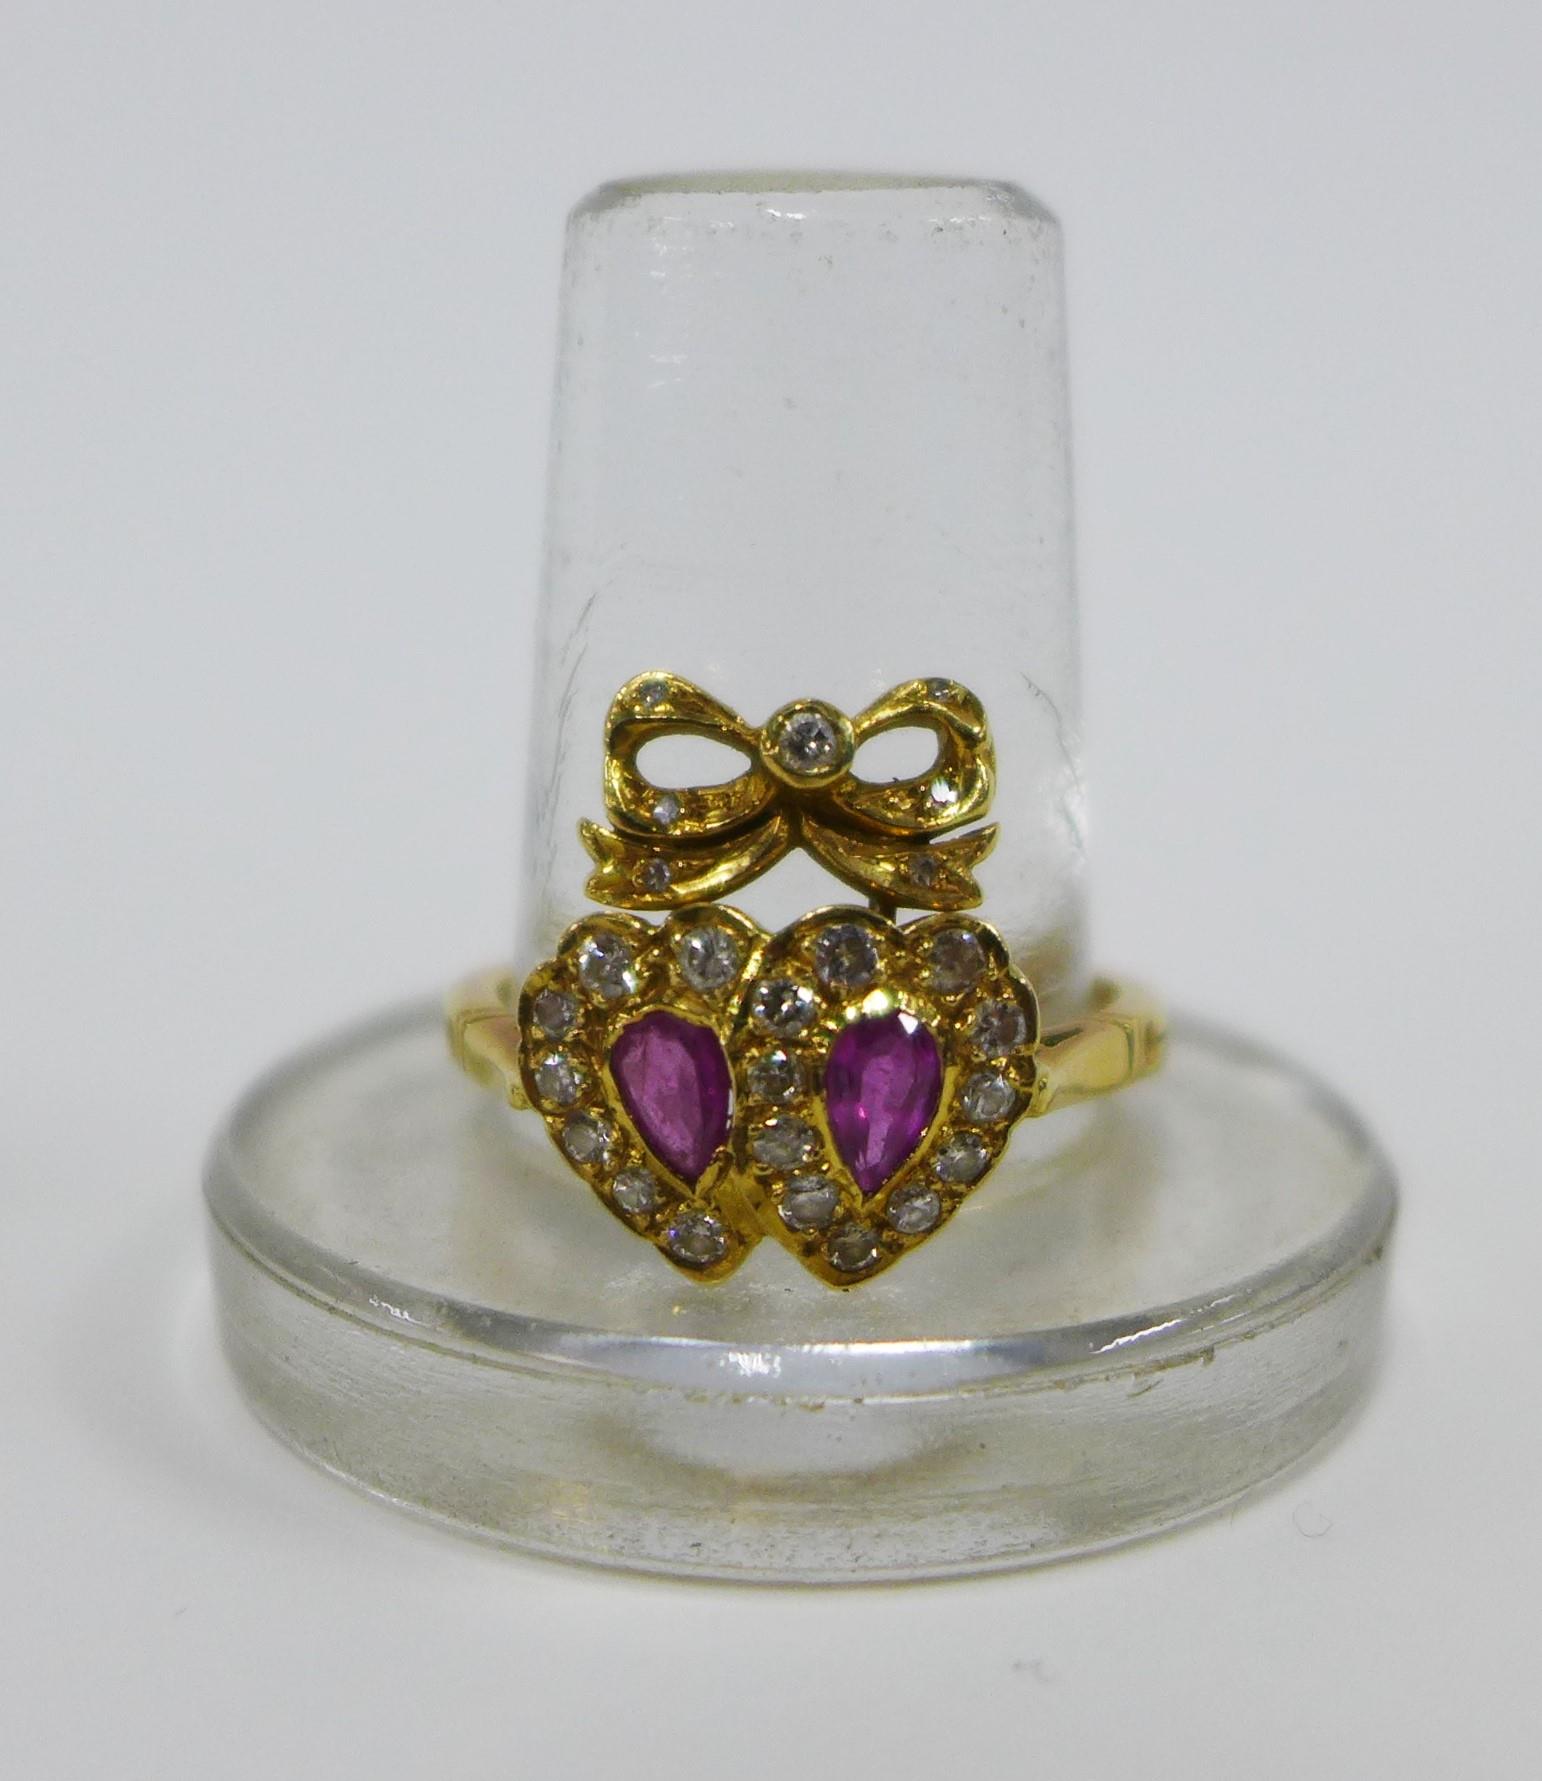 18ct gold ruby and diamond ring with a double heart and ribbon bow setting, London 1978 - Image 2 of 4